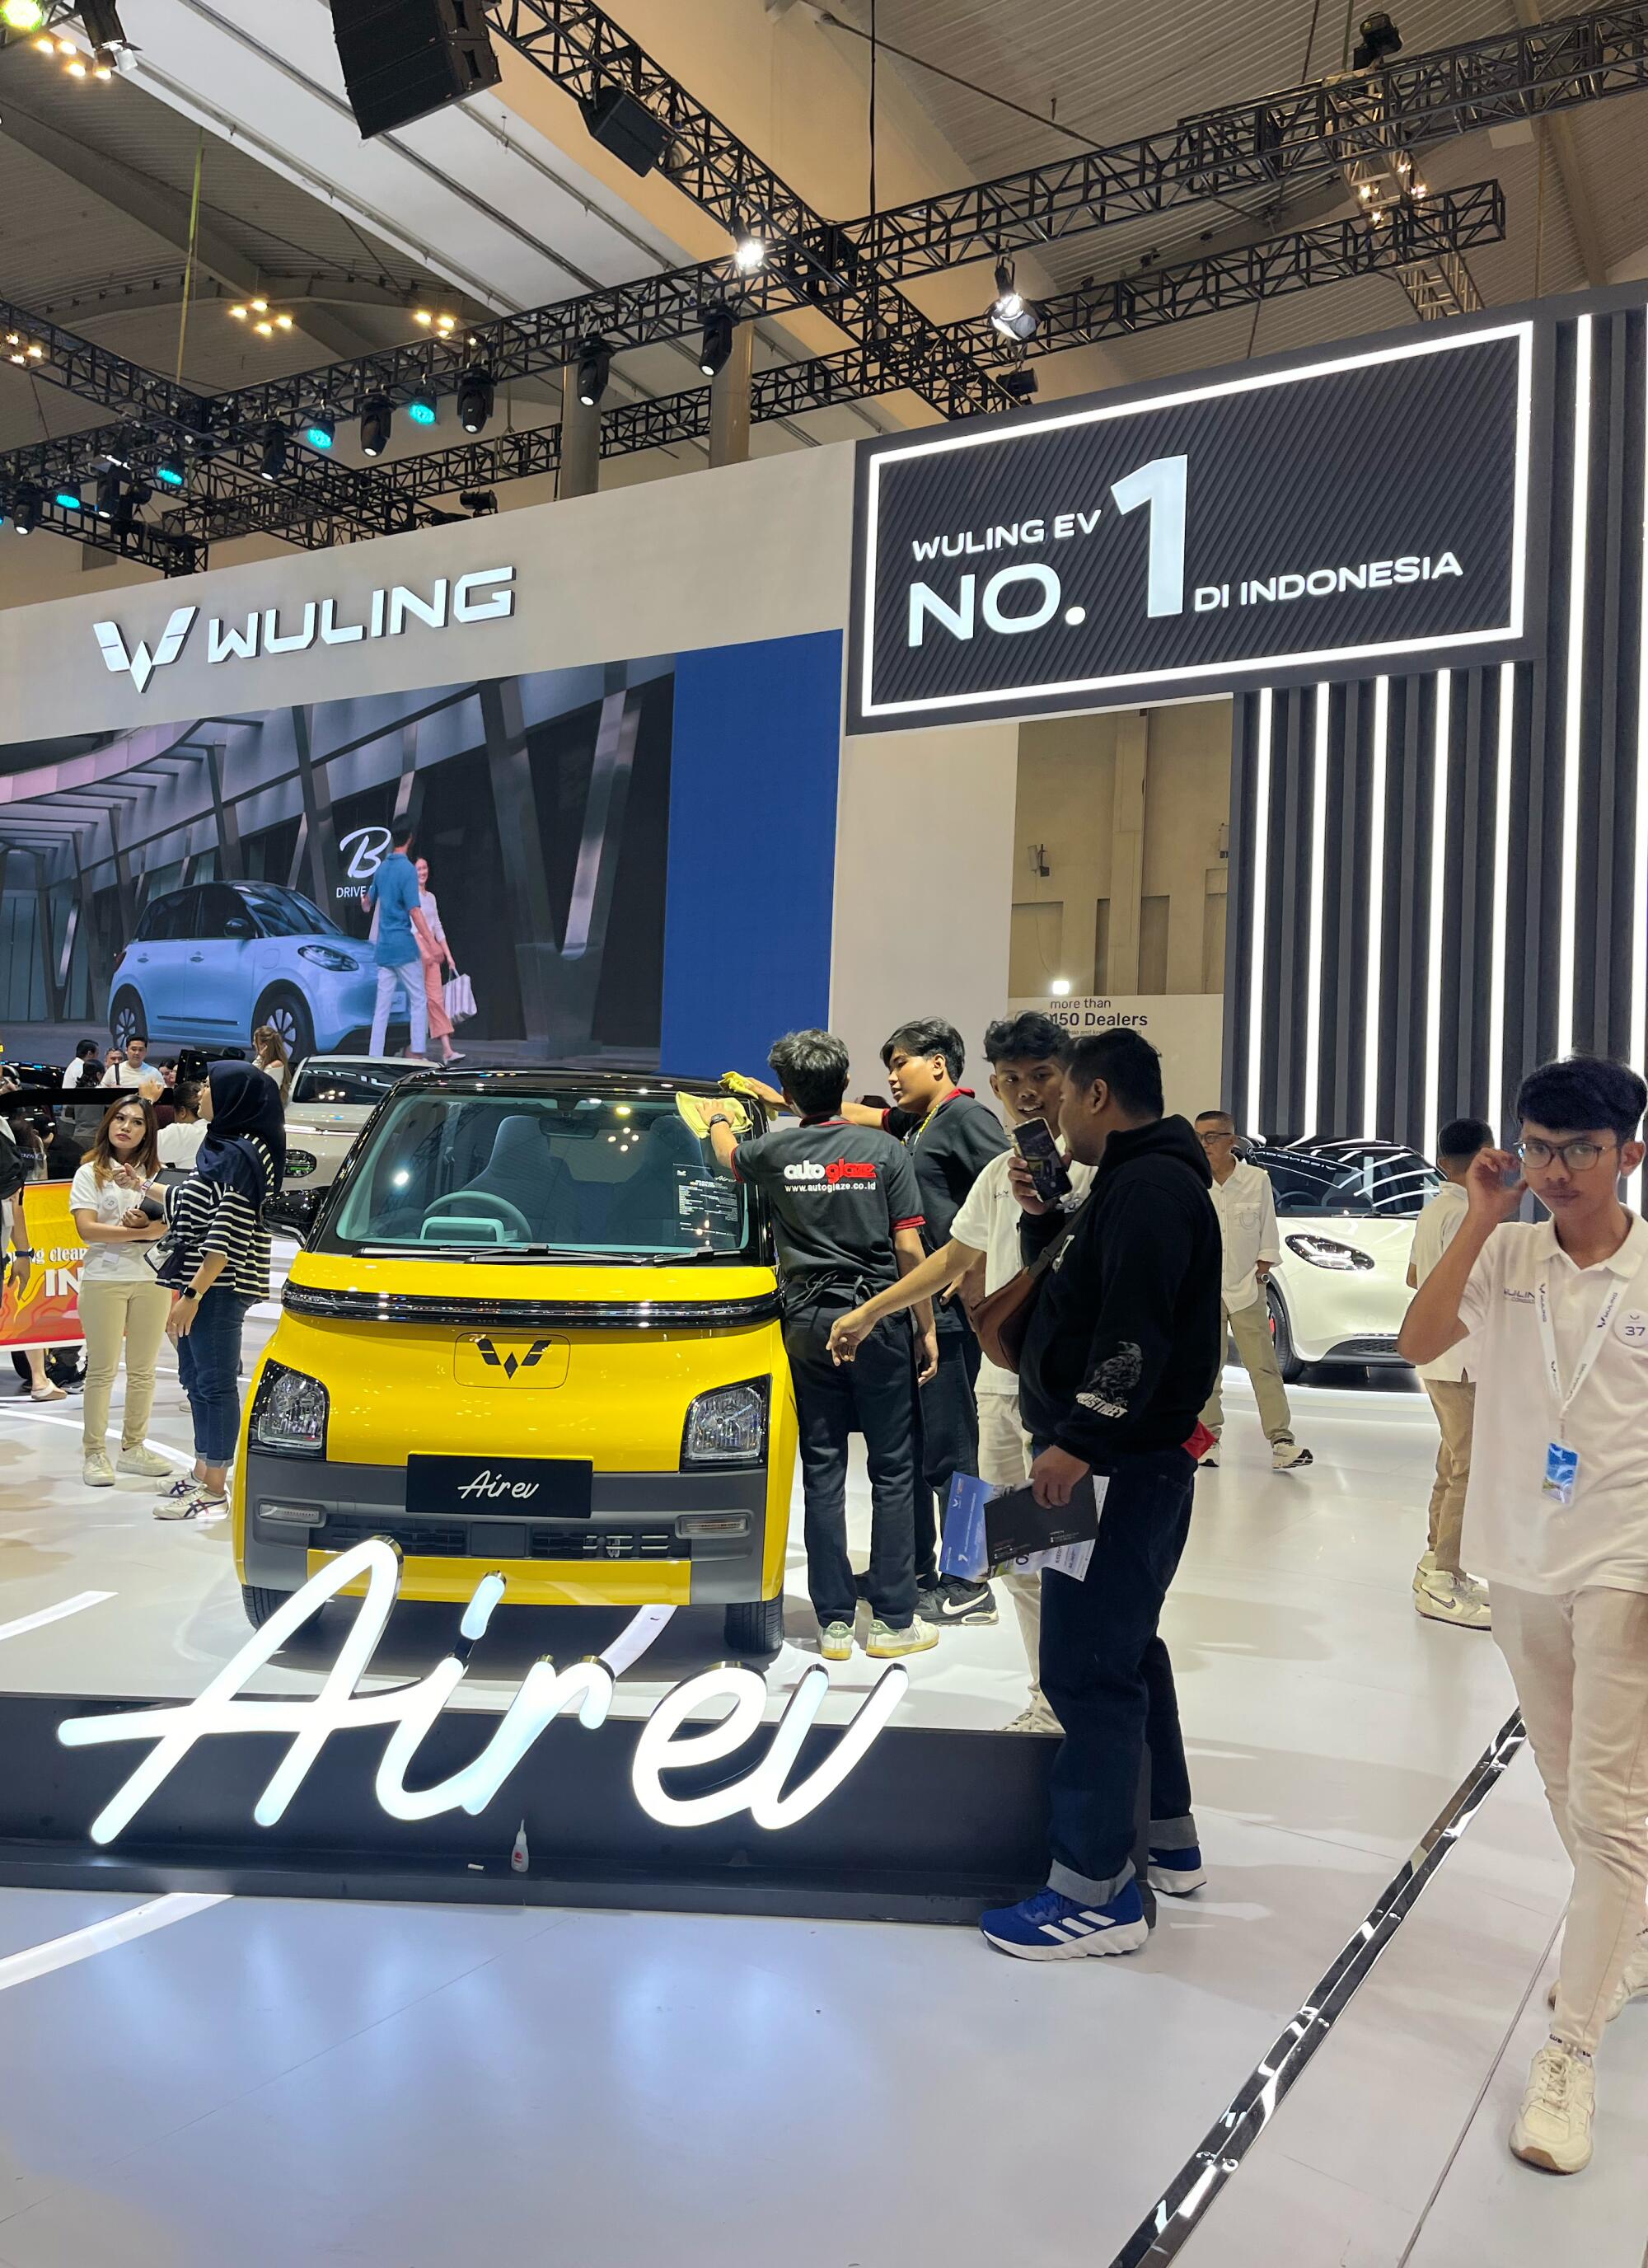 A Wuling Air EV is displayed at an auto exhibition